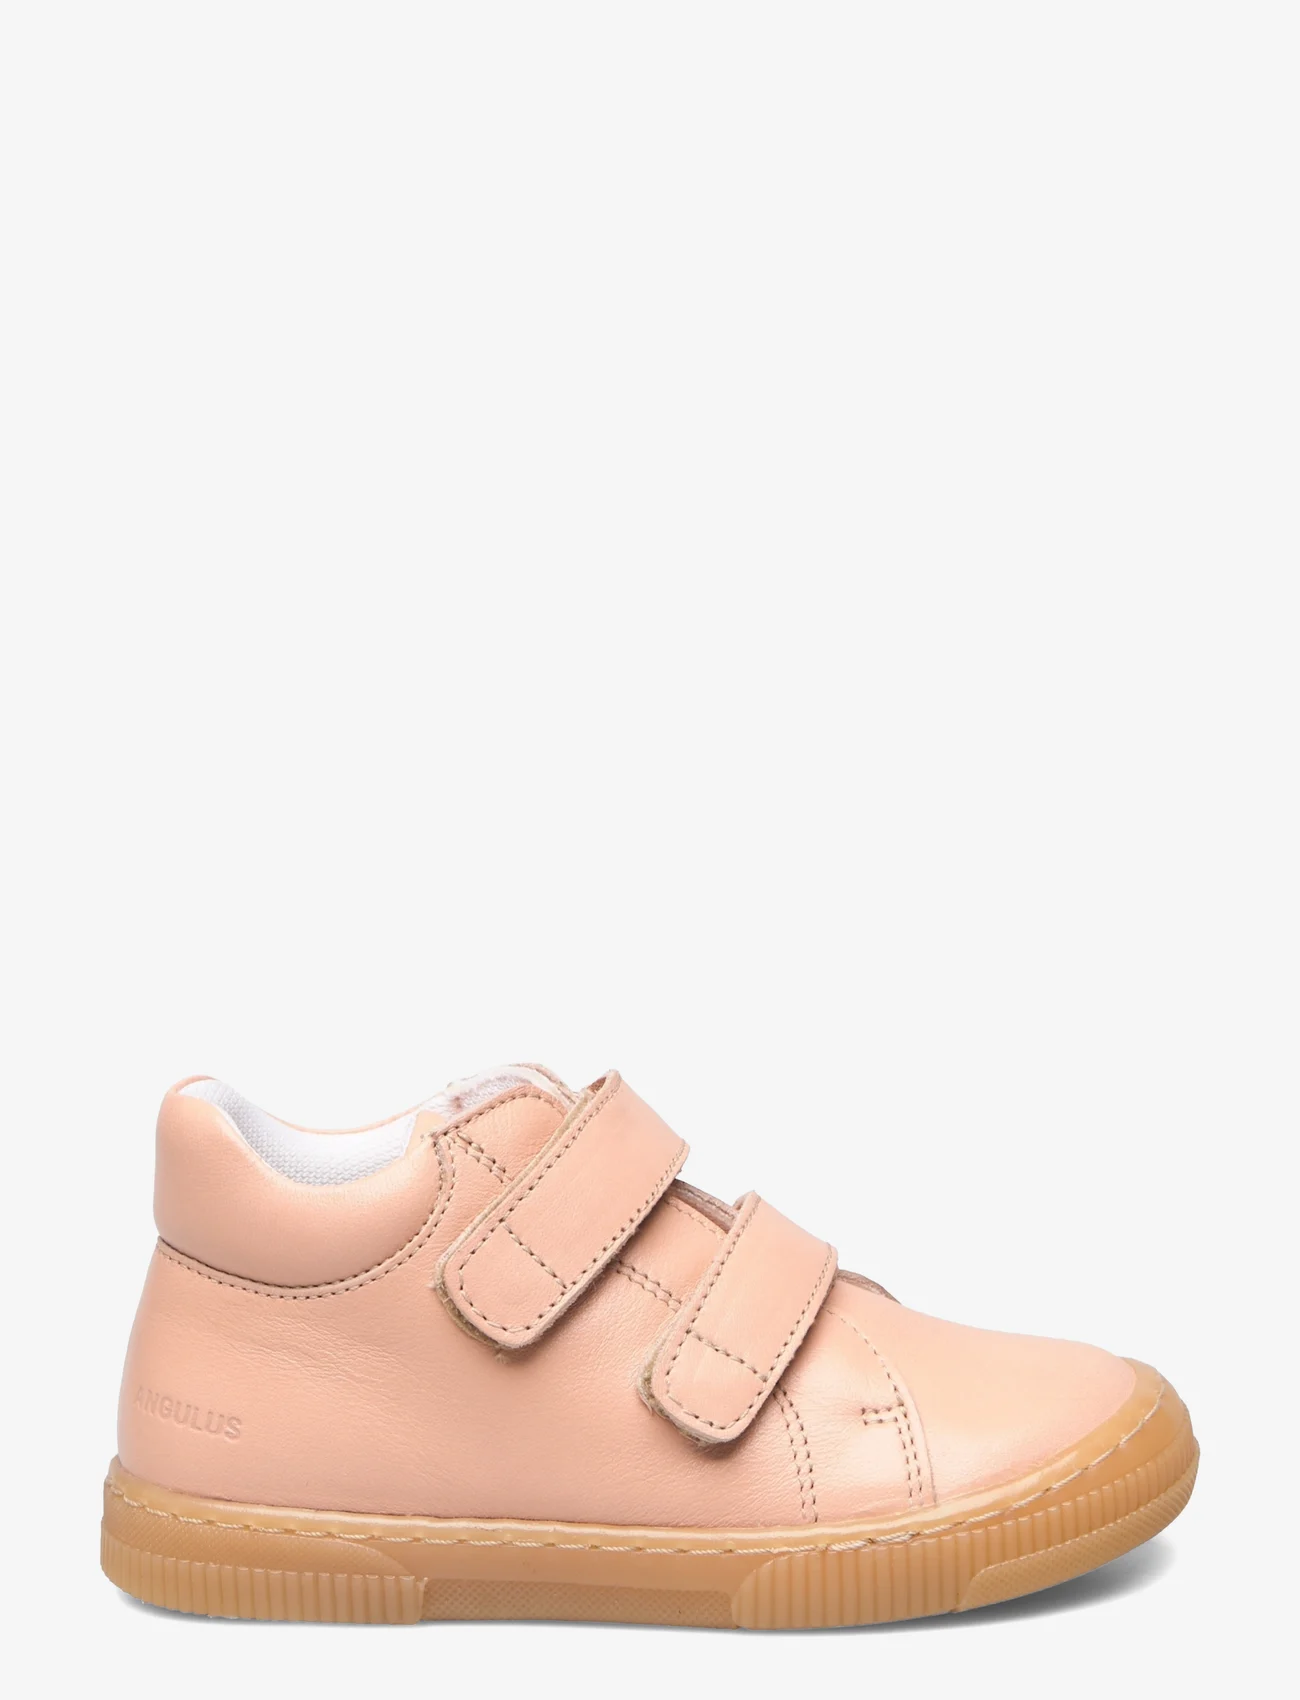 ANGULUS - Shoes - flat - with lace - 1471 peach - 1